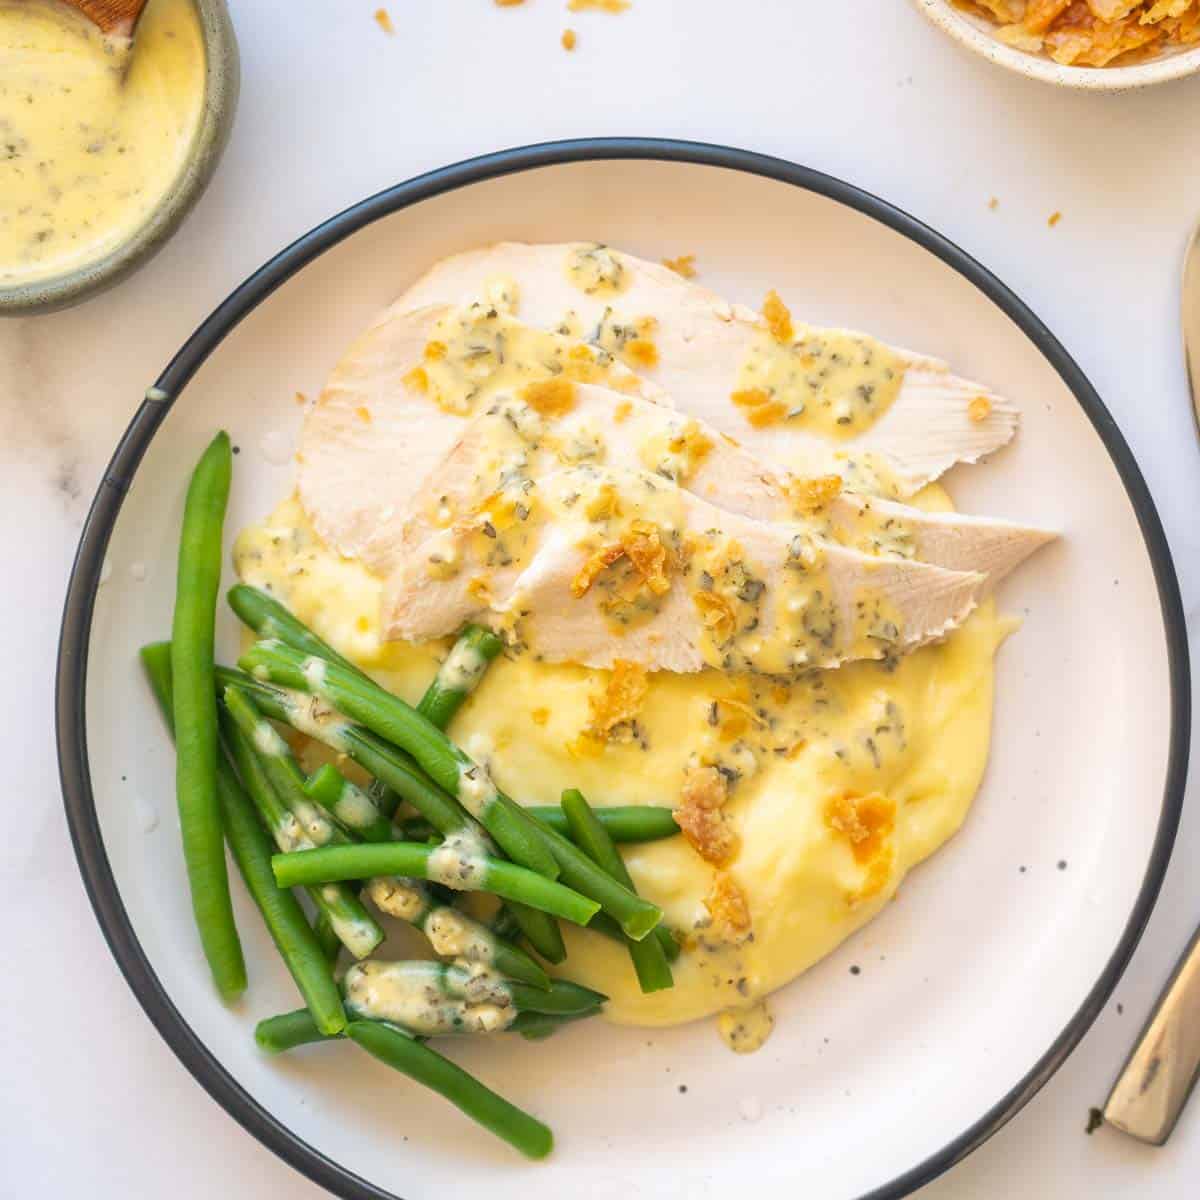 Slices of chicken breast on mashed potatoes with green beans and a yellow sauce. 